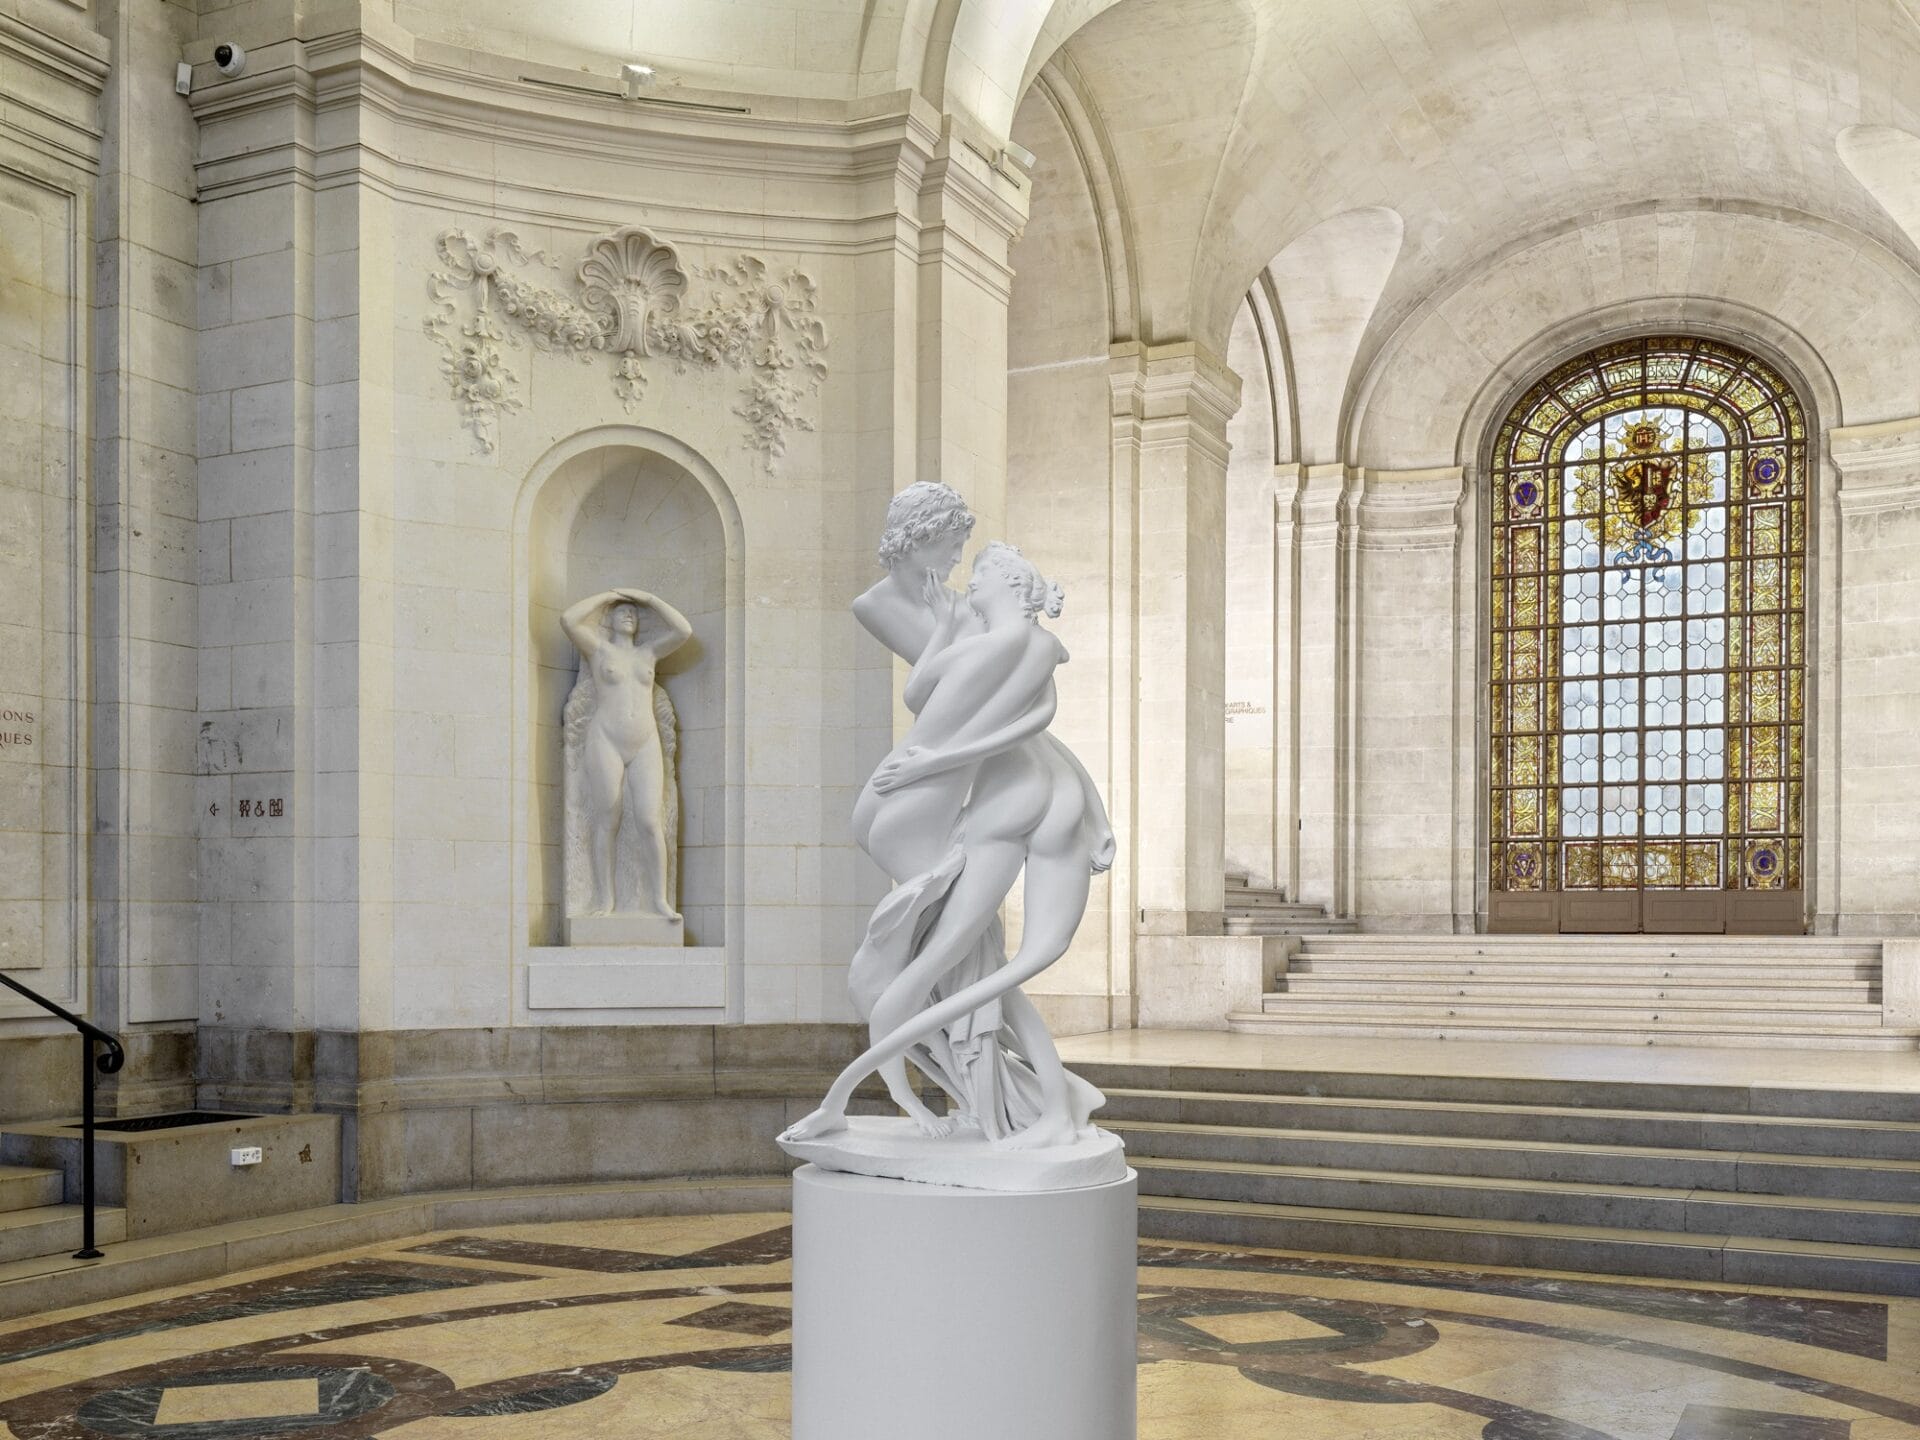 an installation view in a rotunda of a museum with a classical sculpture in a niche in the background and a central sculpture based on a classical piece that has been distorted and elongated